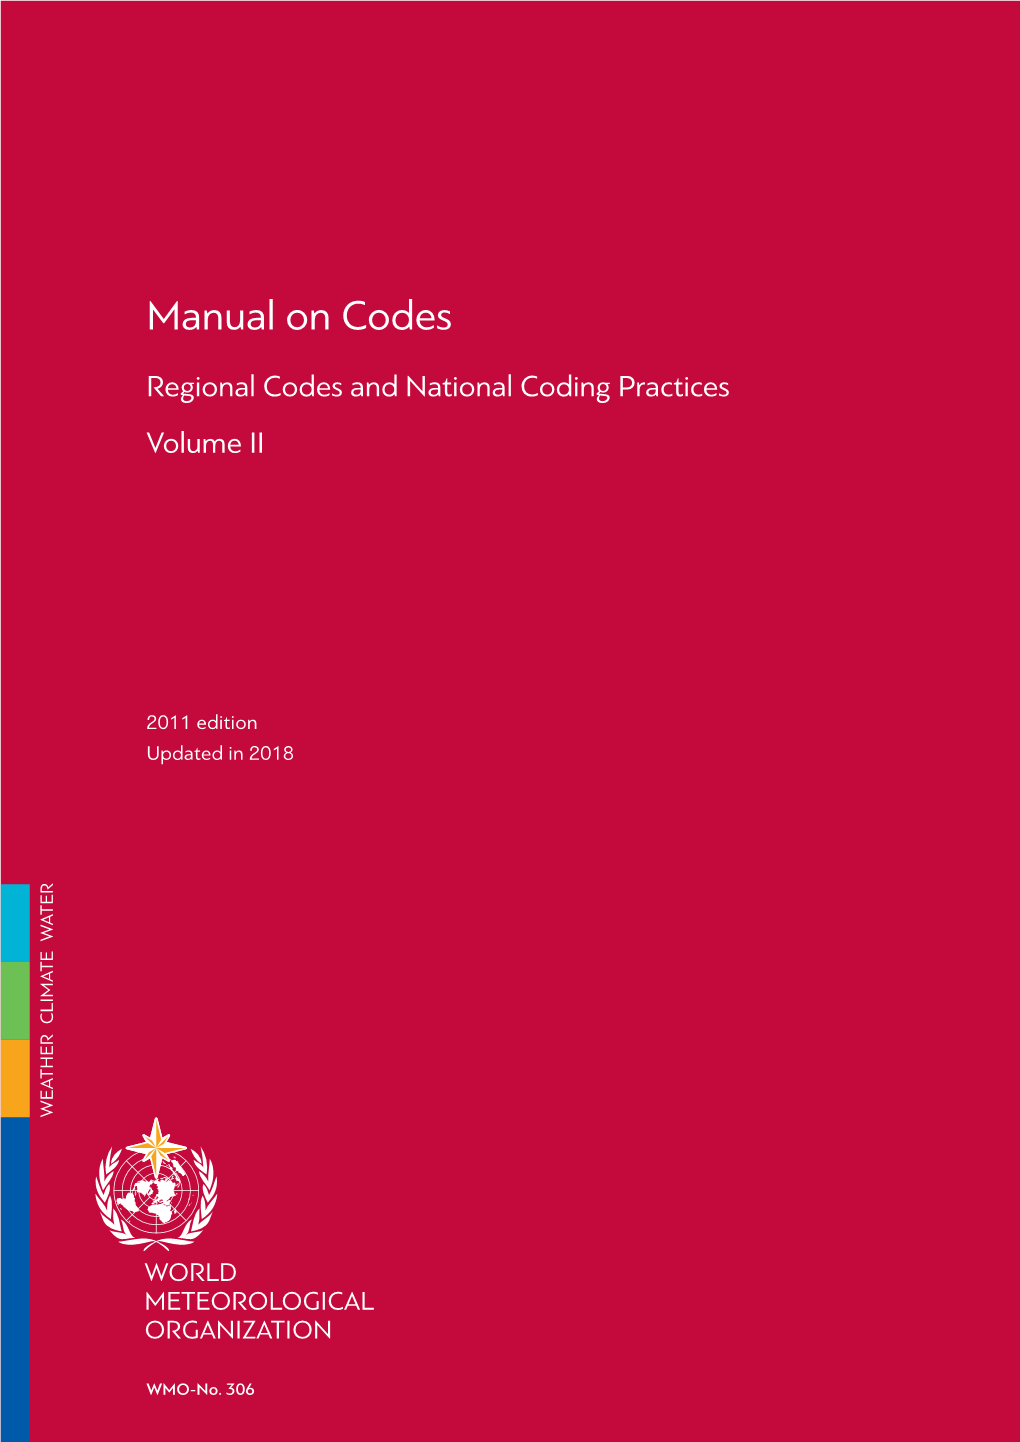 Regional Codes and National Coding Practices, Volume II